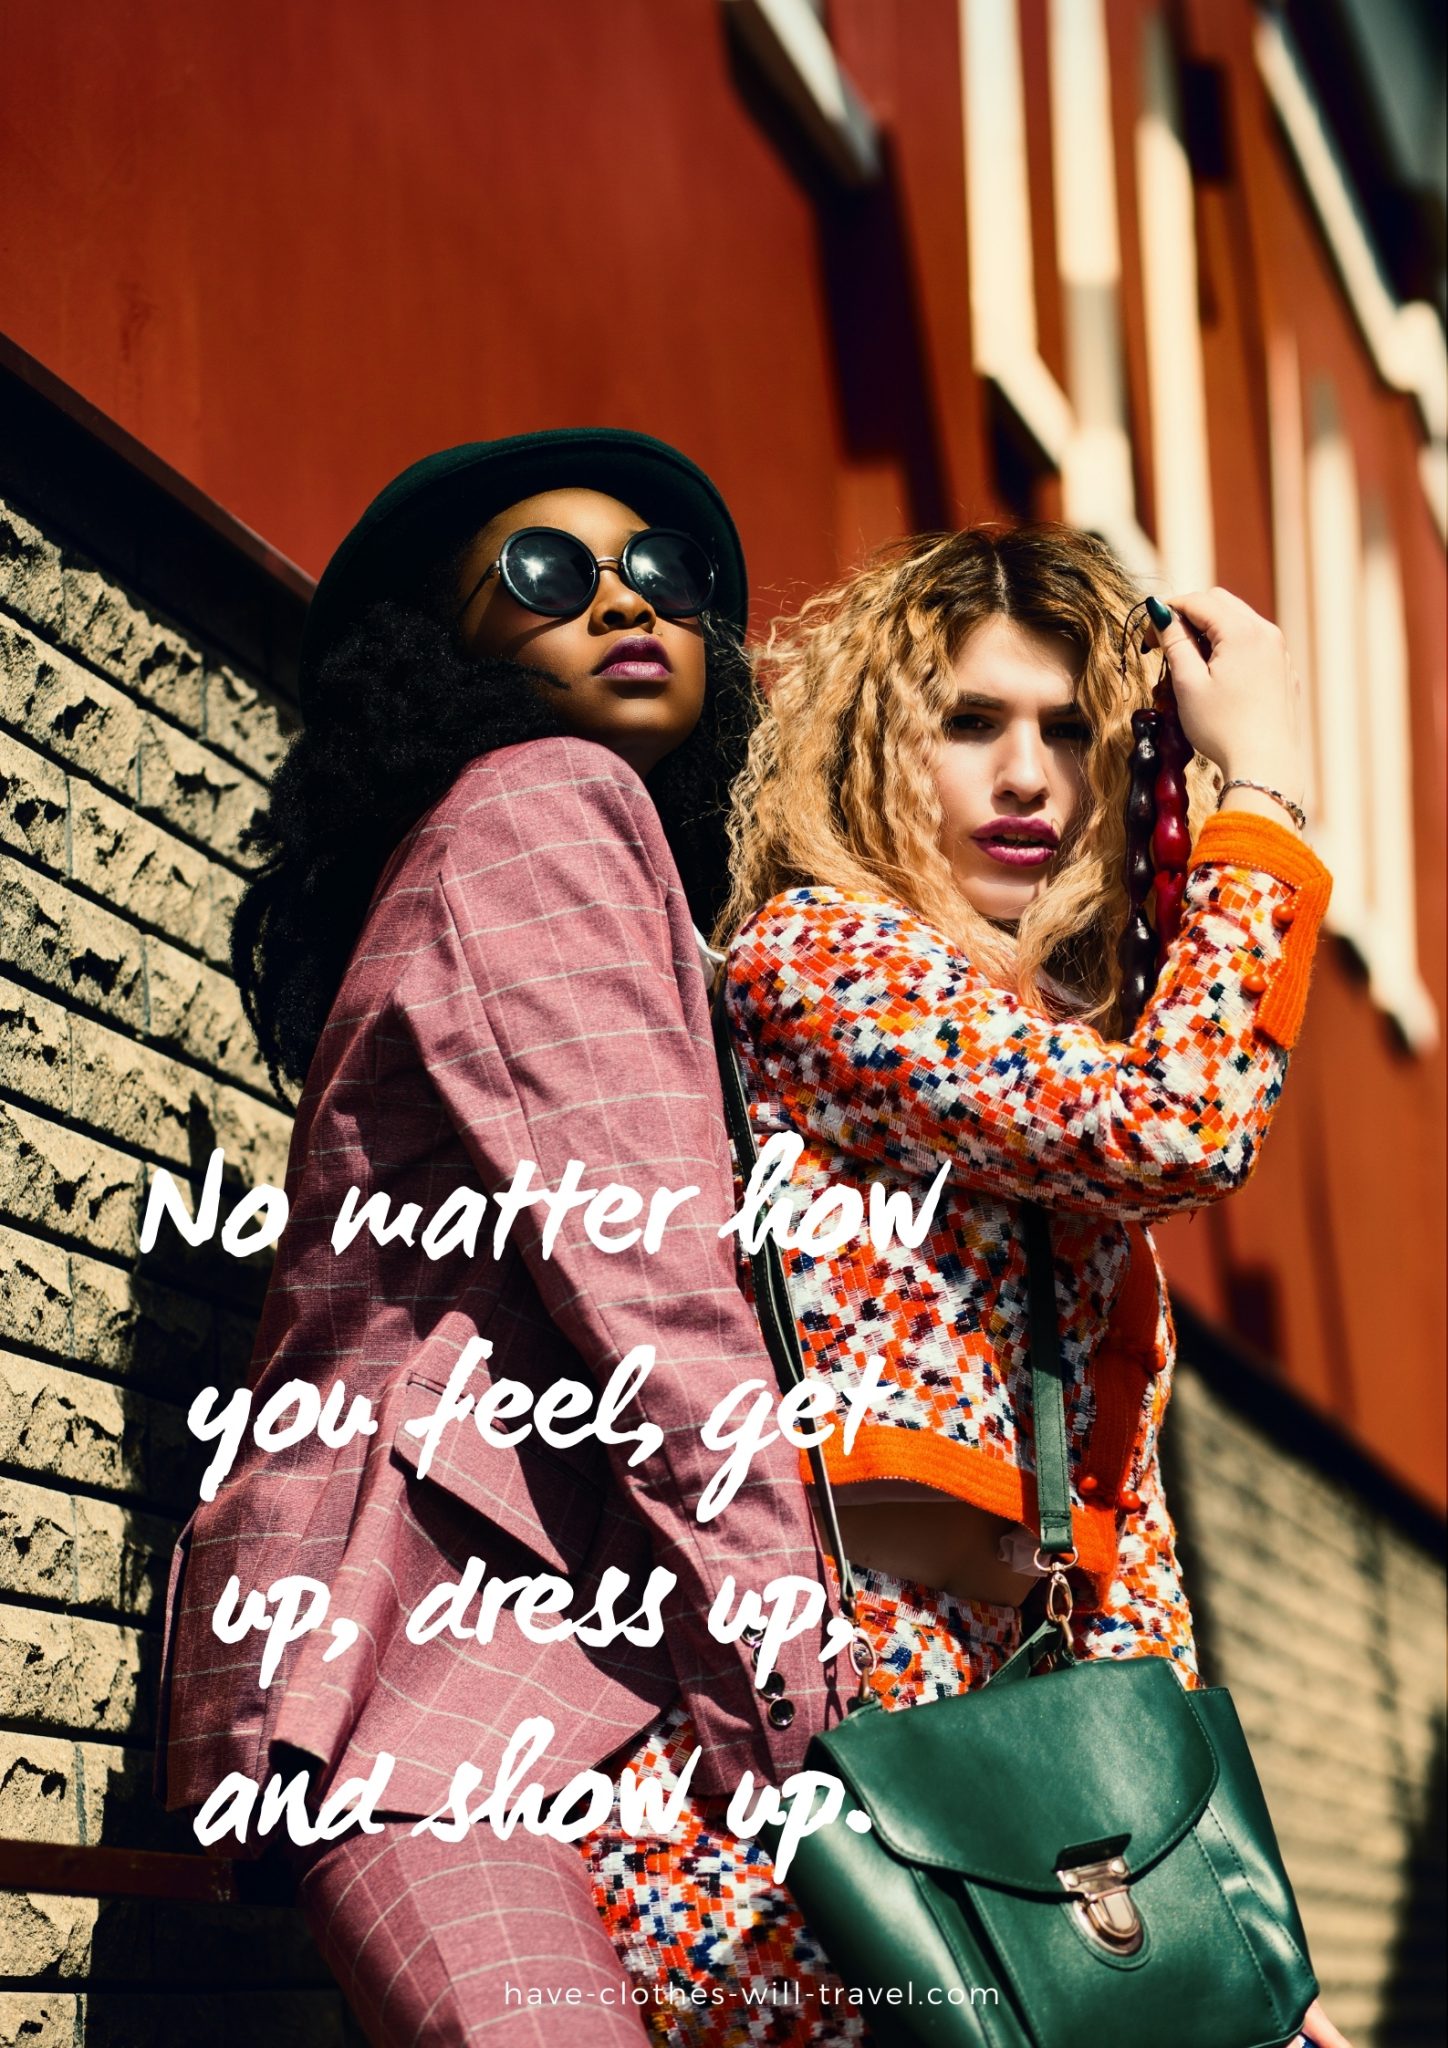 Two women stand next to each other, posed against a brock wall, both wearing brightly colored patterned outfits. Text over the image reads, "No matter how you feel, get up, dress up, and show up."